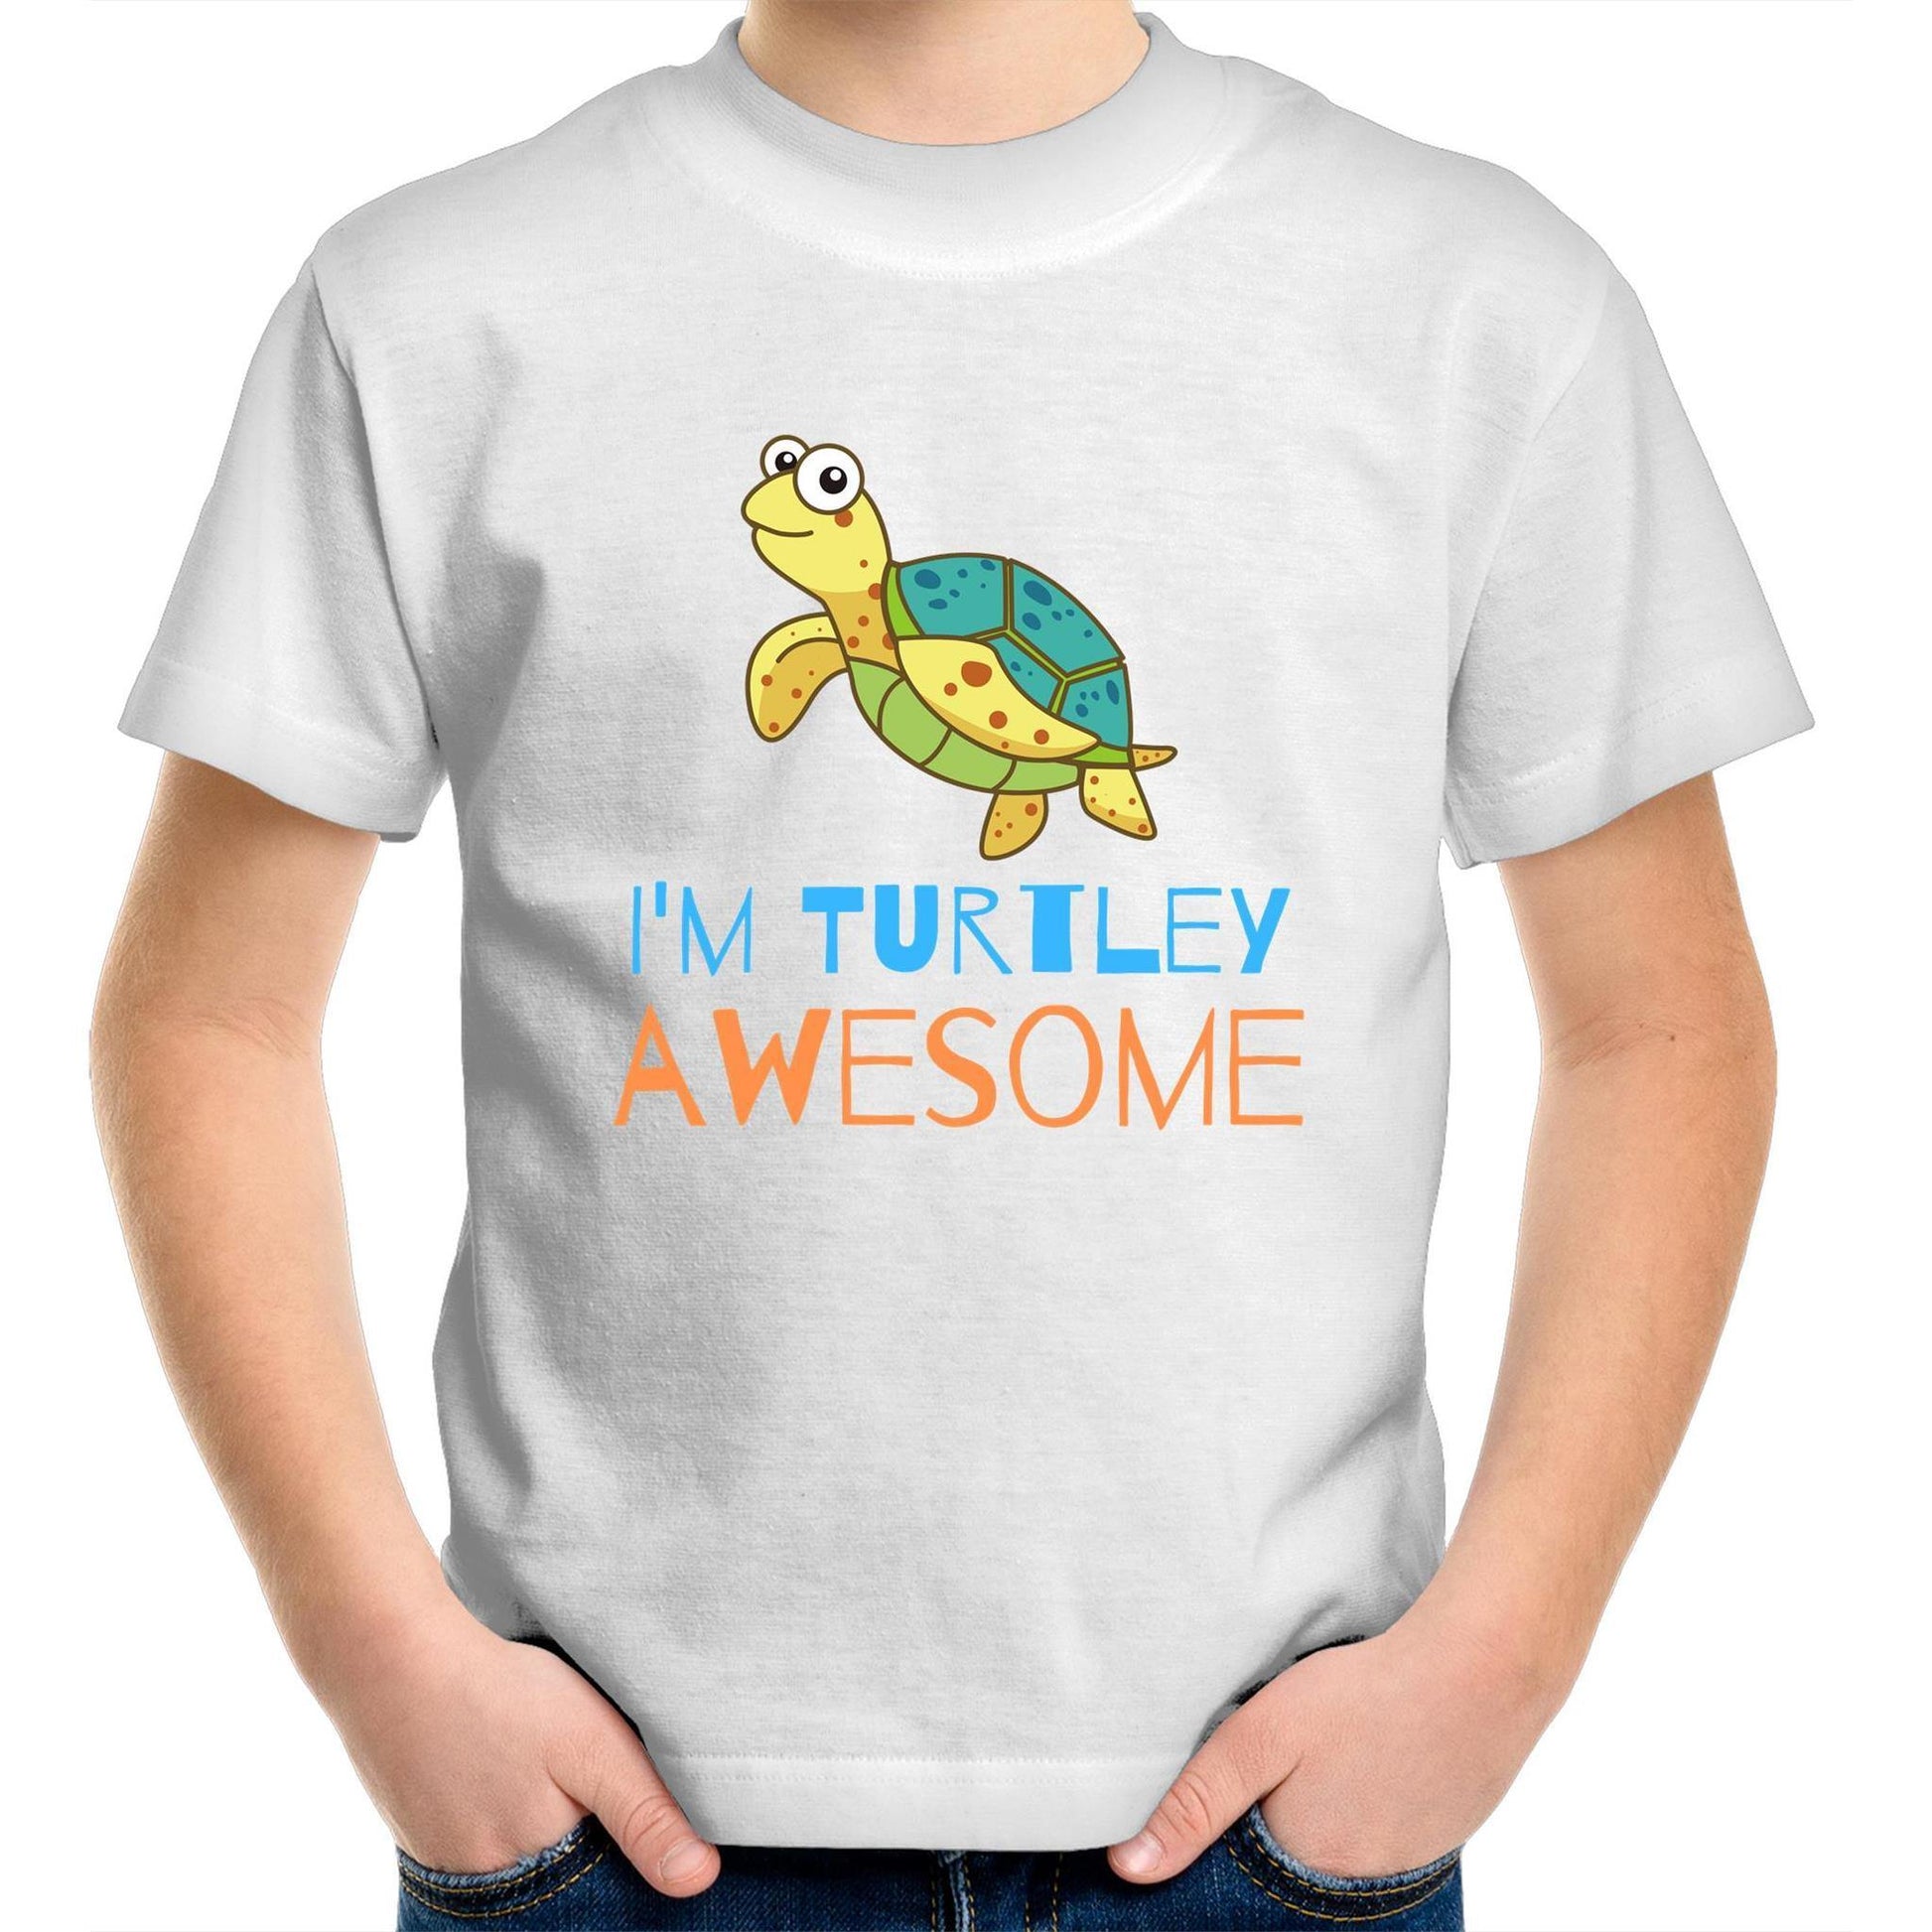 I'm Turtley Awesome - Kids Youth Crew T-Shirt White Kids Youth T-shirt animal